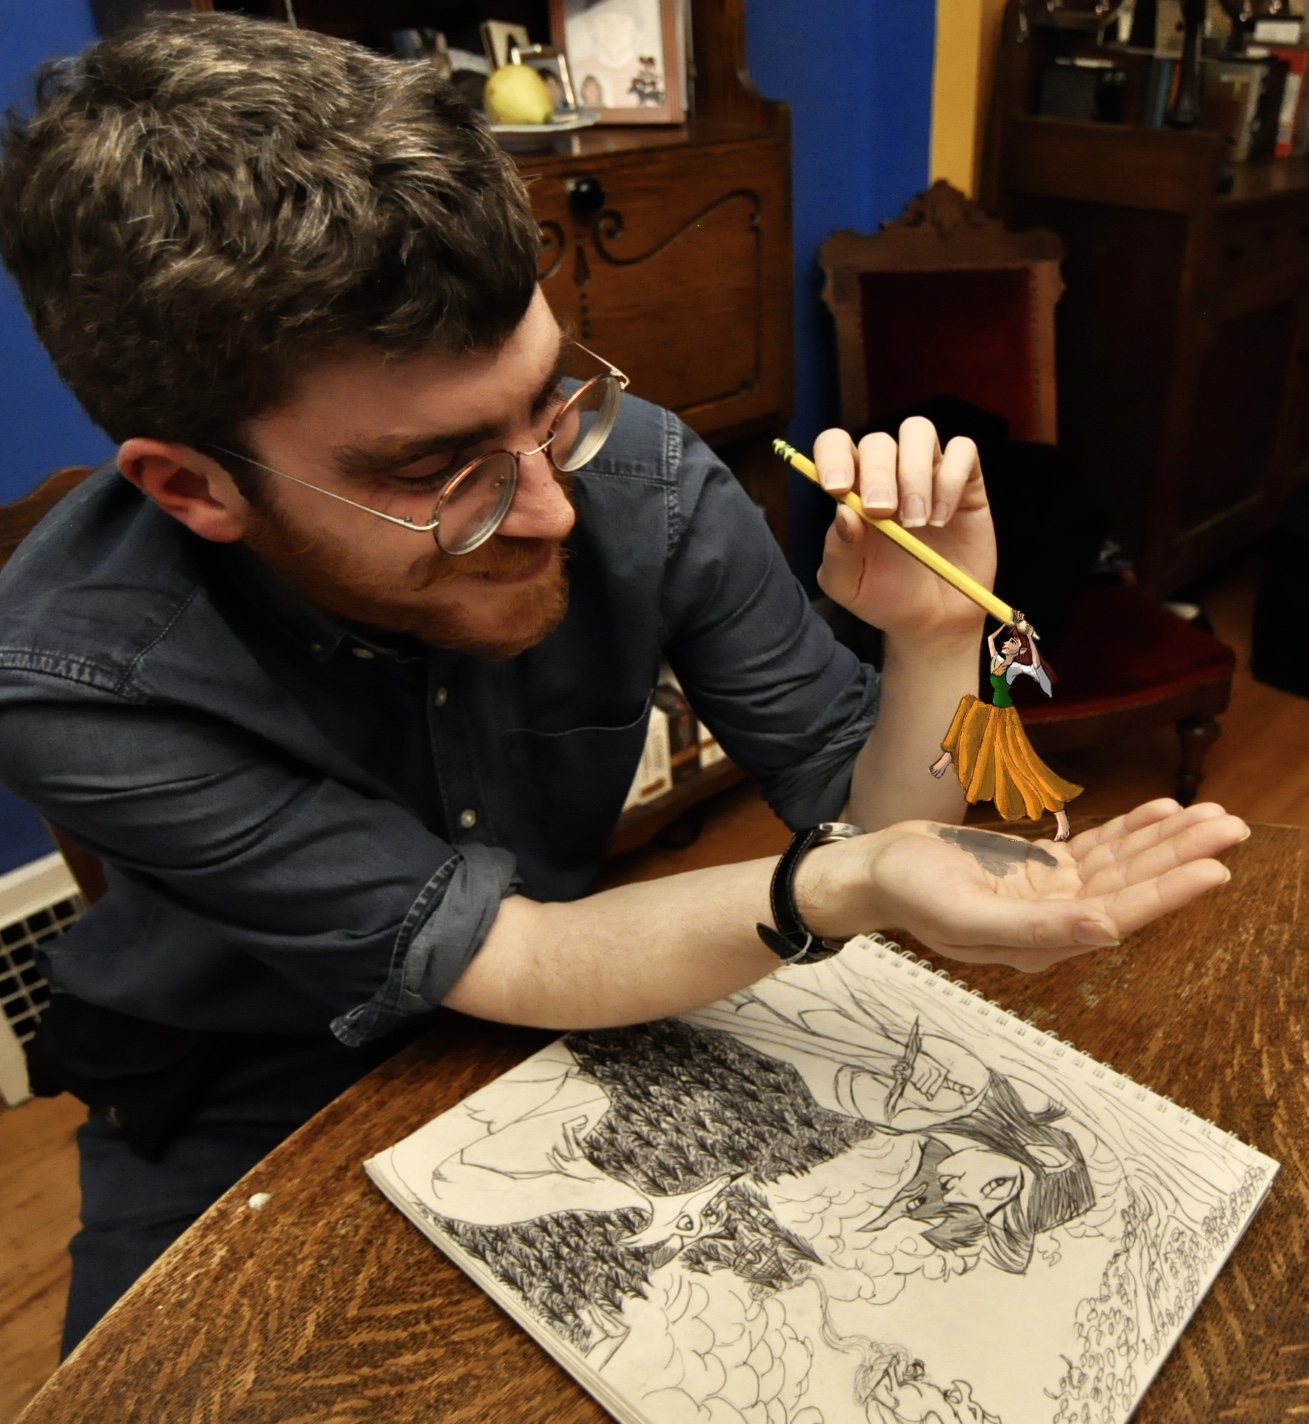 Picture of Tristan, a young, white male with glasses, next to some of his art and holding a pencil with one of his characters photoshopped to look like it is holding onto the end.